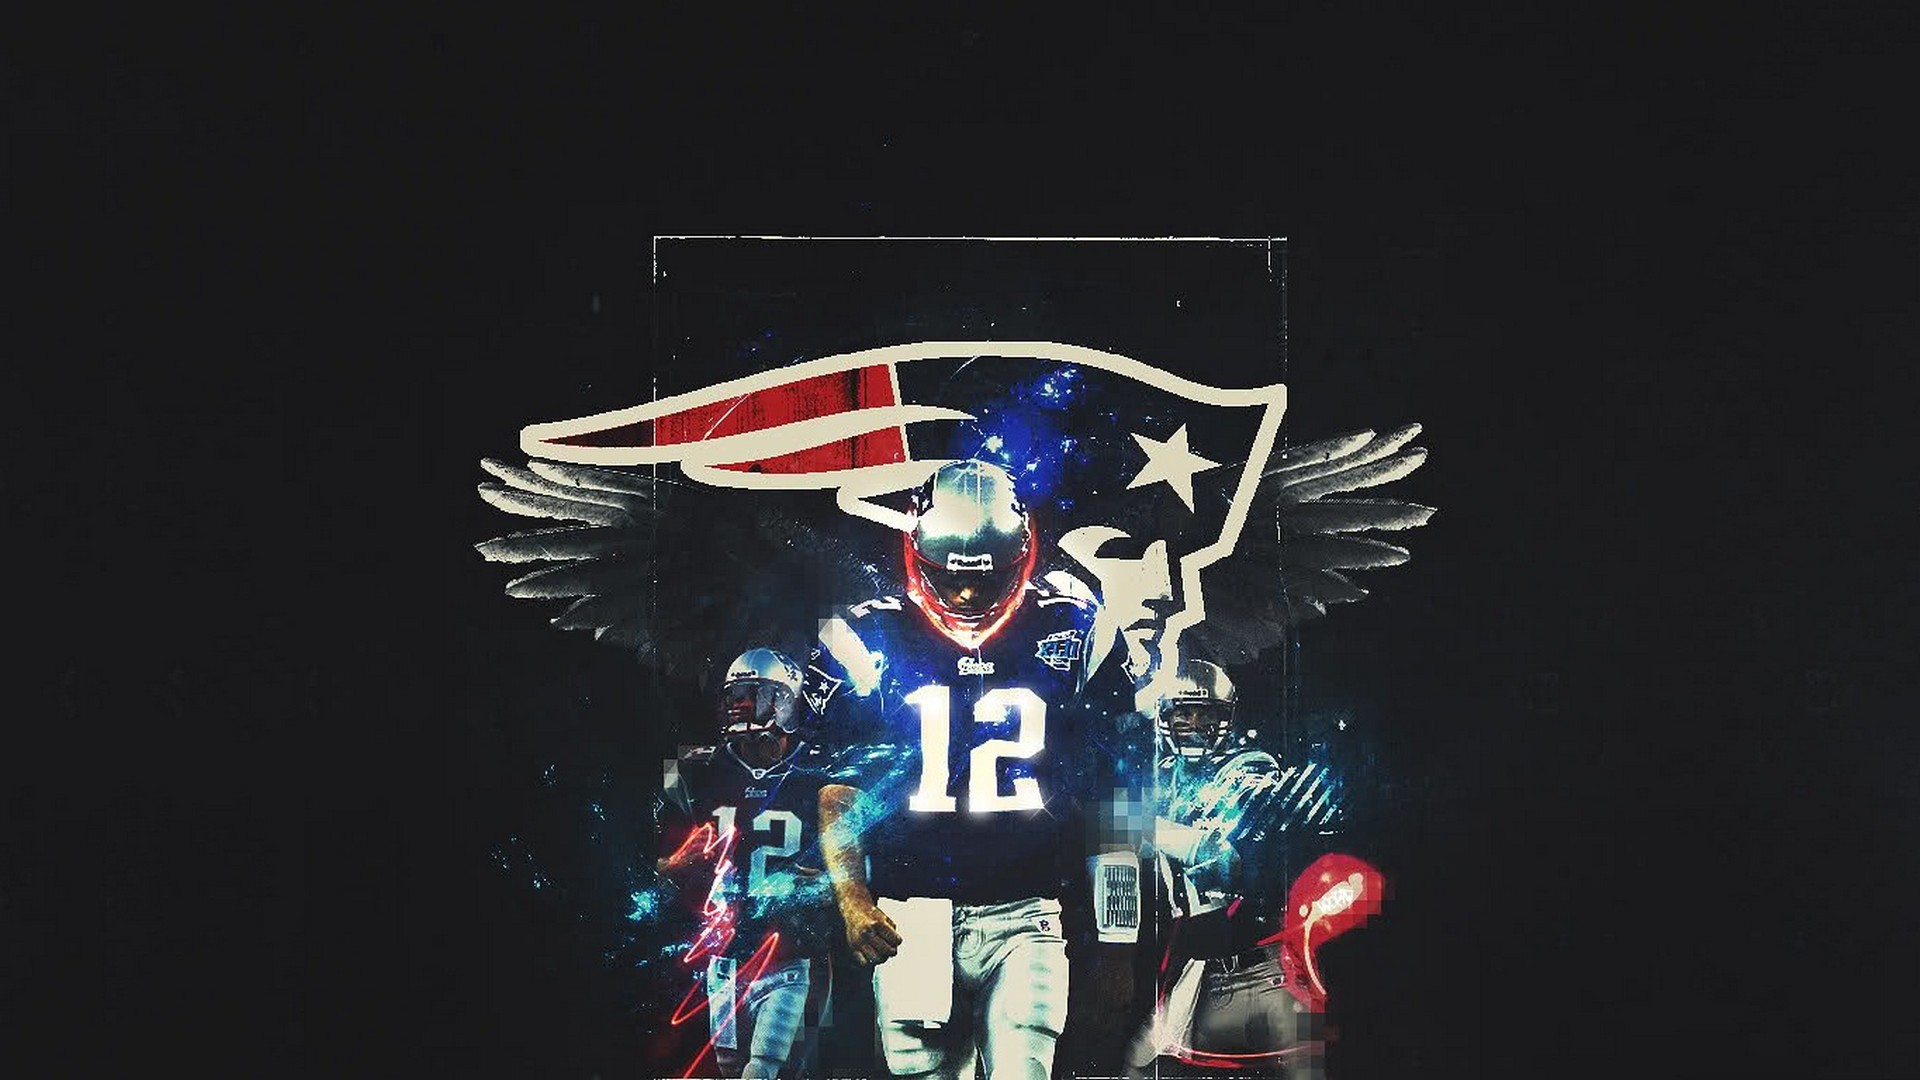 Wallpapers Computer Tom Brady Super Bowl with image resolution 1920x1080 pixel. You can make this wallpaper for your Desktop Computer Backgrounds, Mac Wallpapers, Android Lock screen or iPhone Screensavers